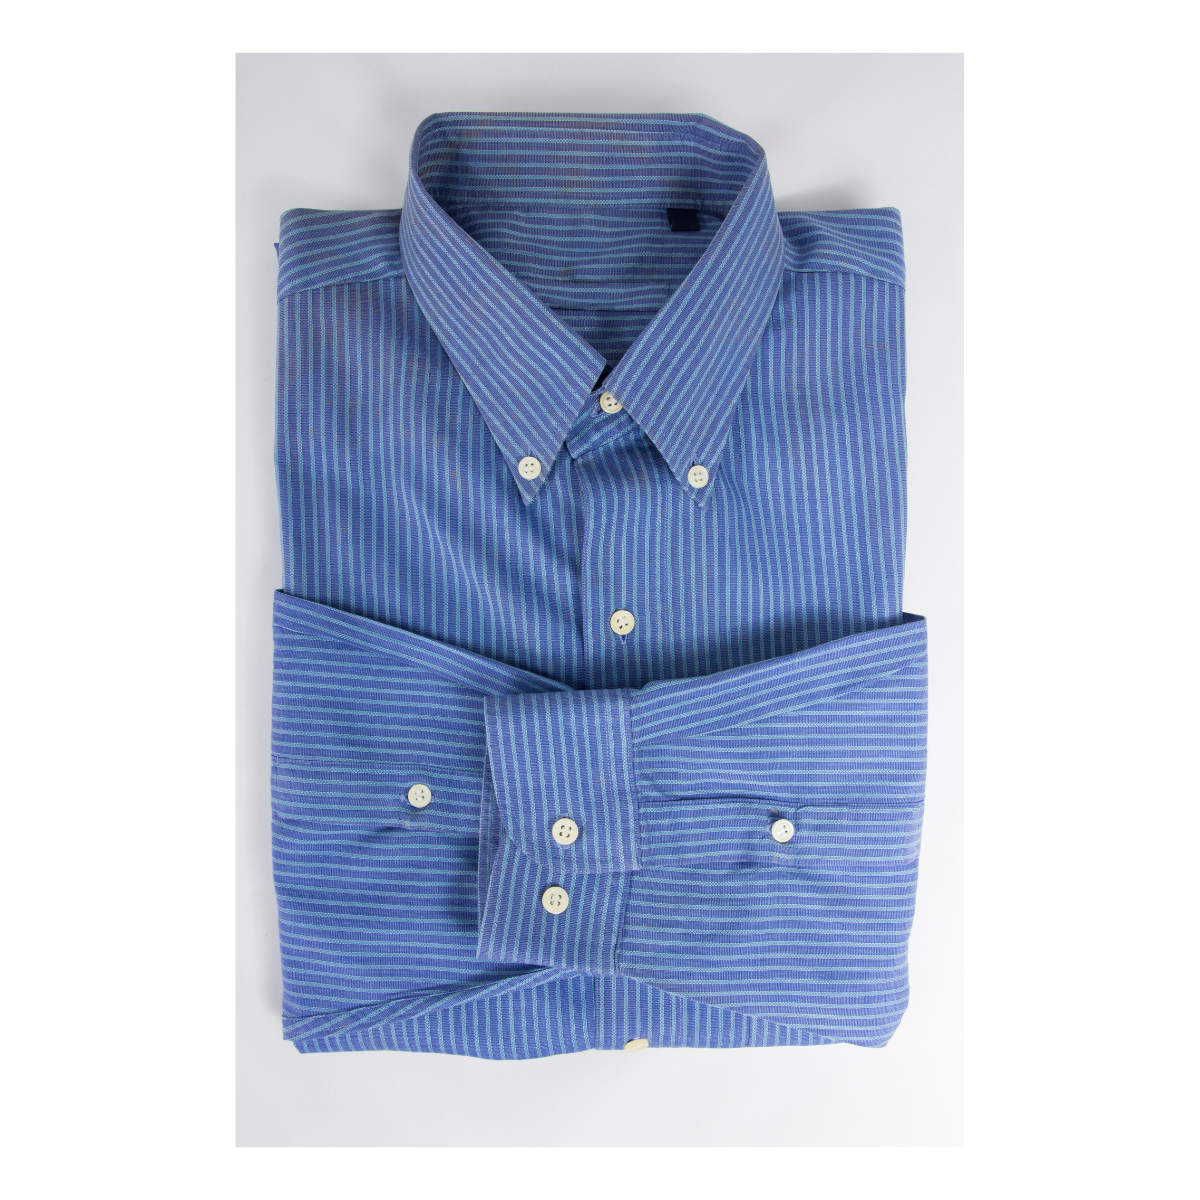 3. Timeless Elegance: The Perfect Cotton Dress Shirt for Your 2nd Anniversary